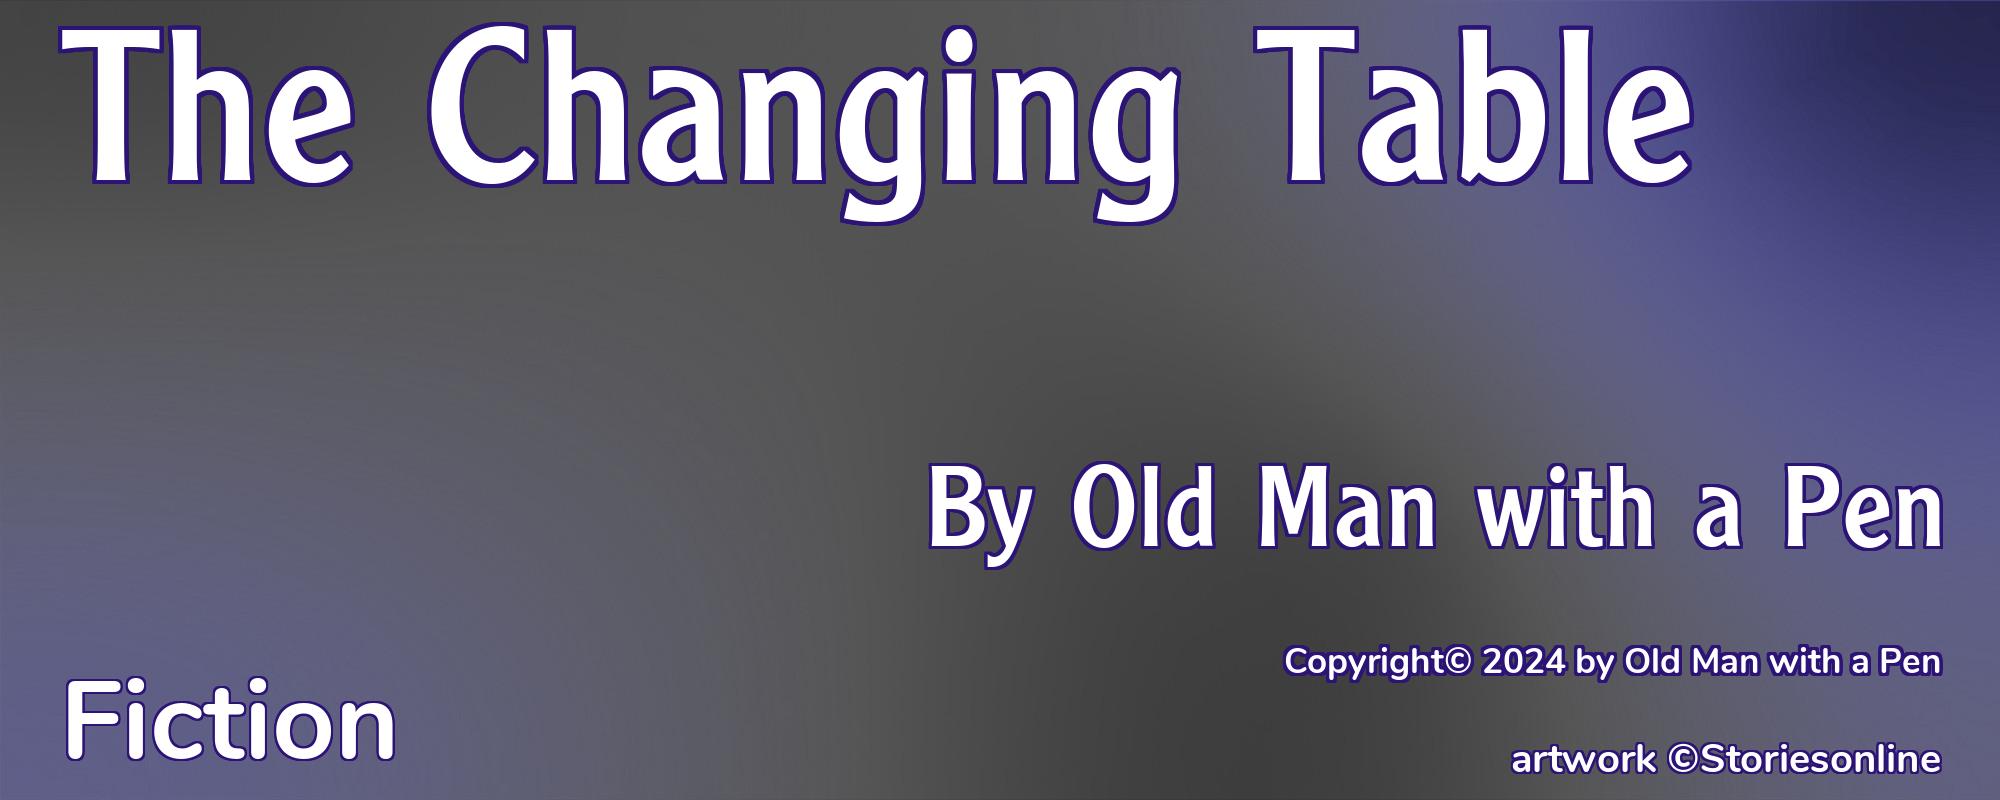 The Changing Table - Cover